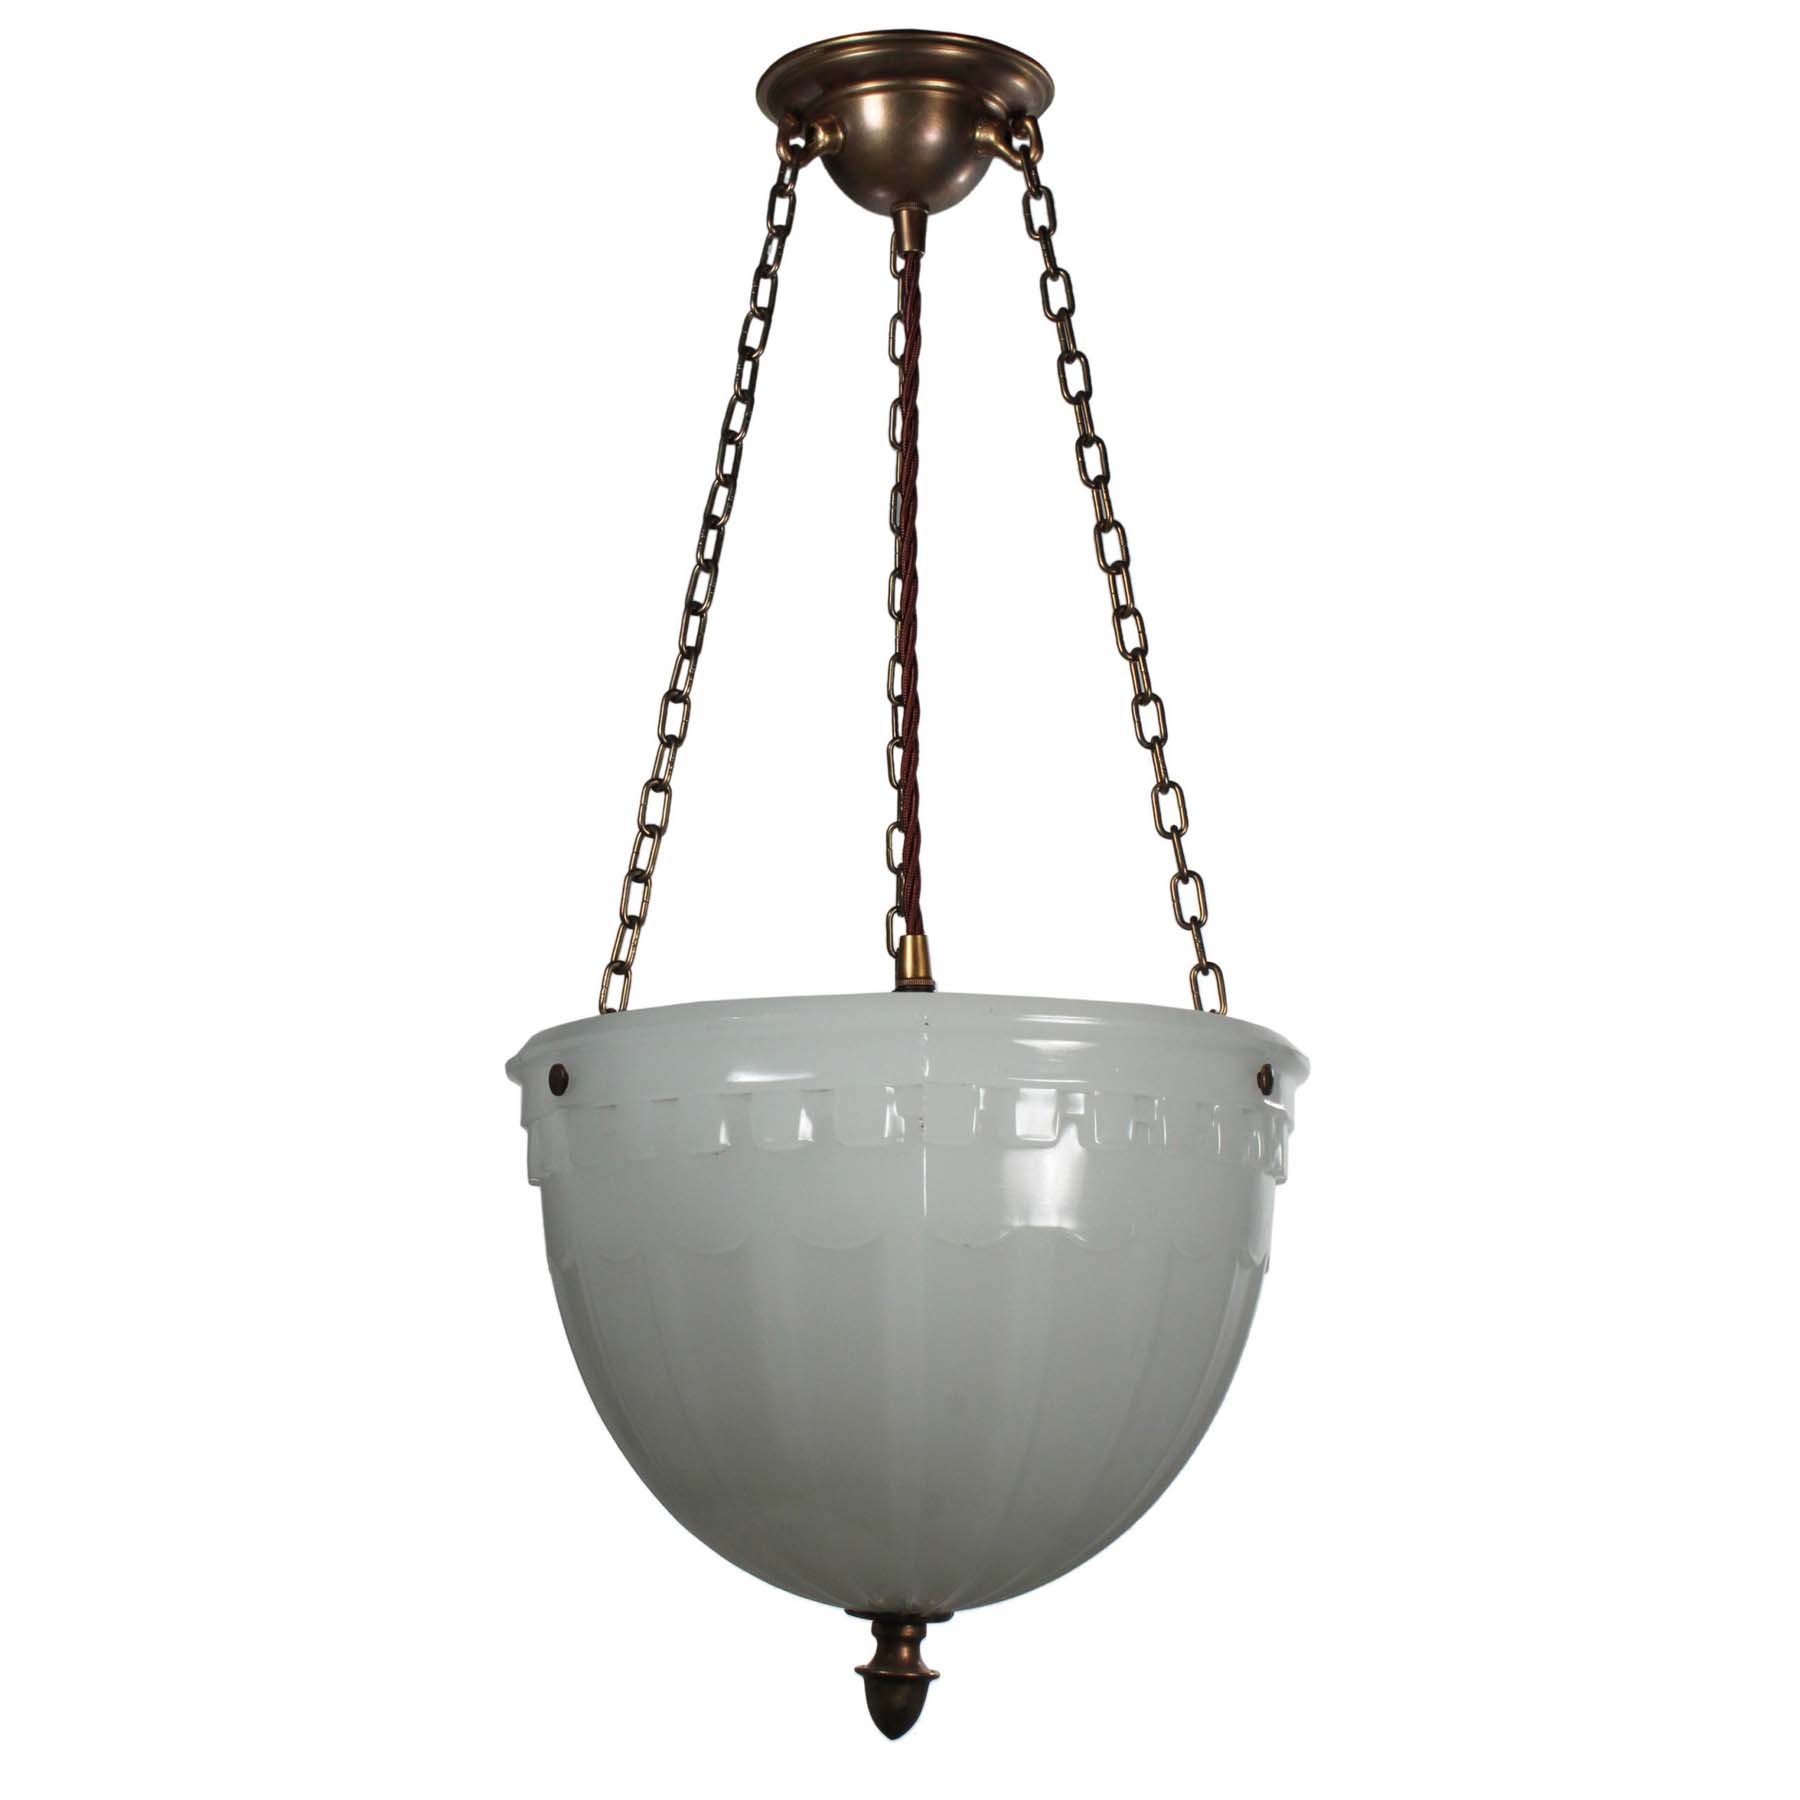 SOLD Antique Neoclassical Inverted Dome Light, Luminous Unit Co.-69817